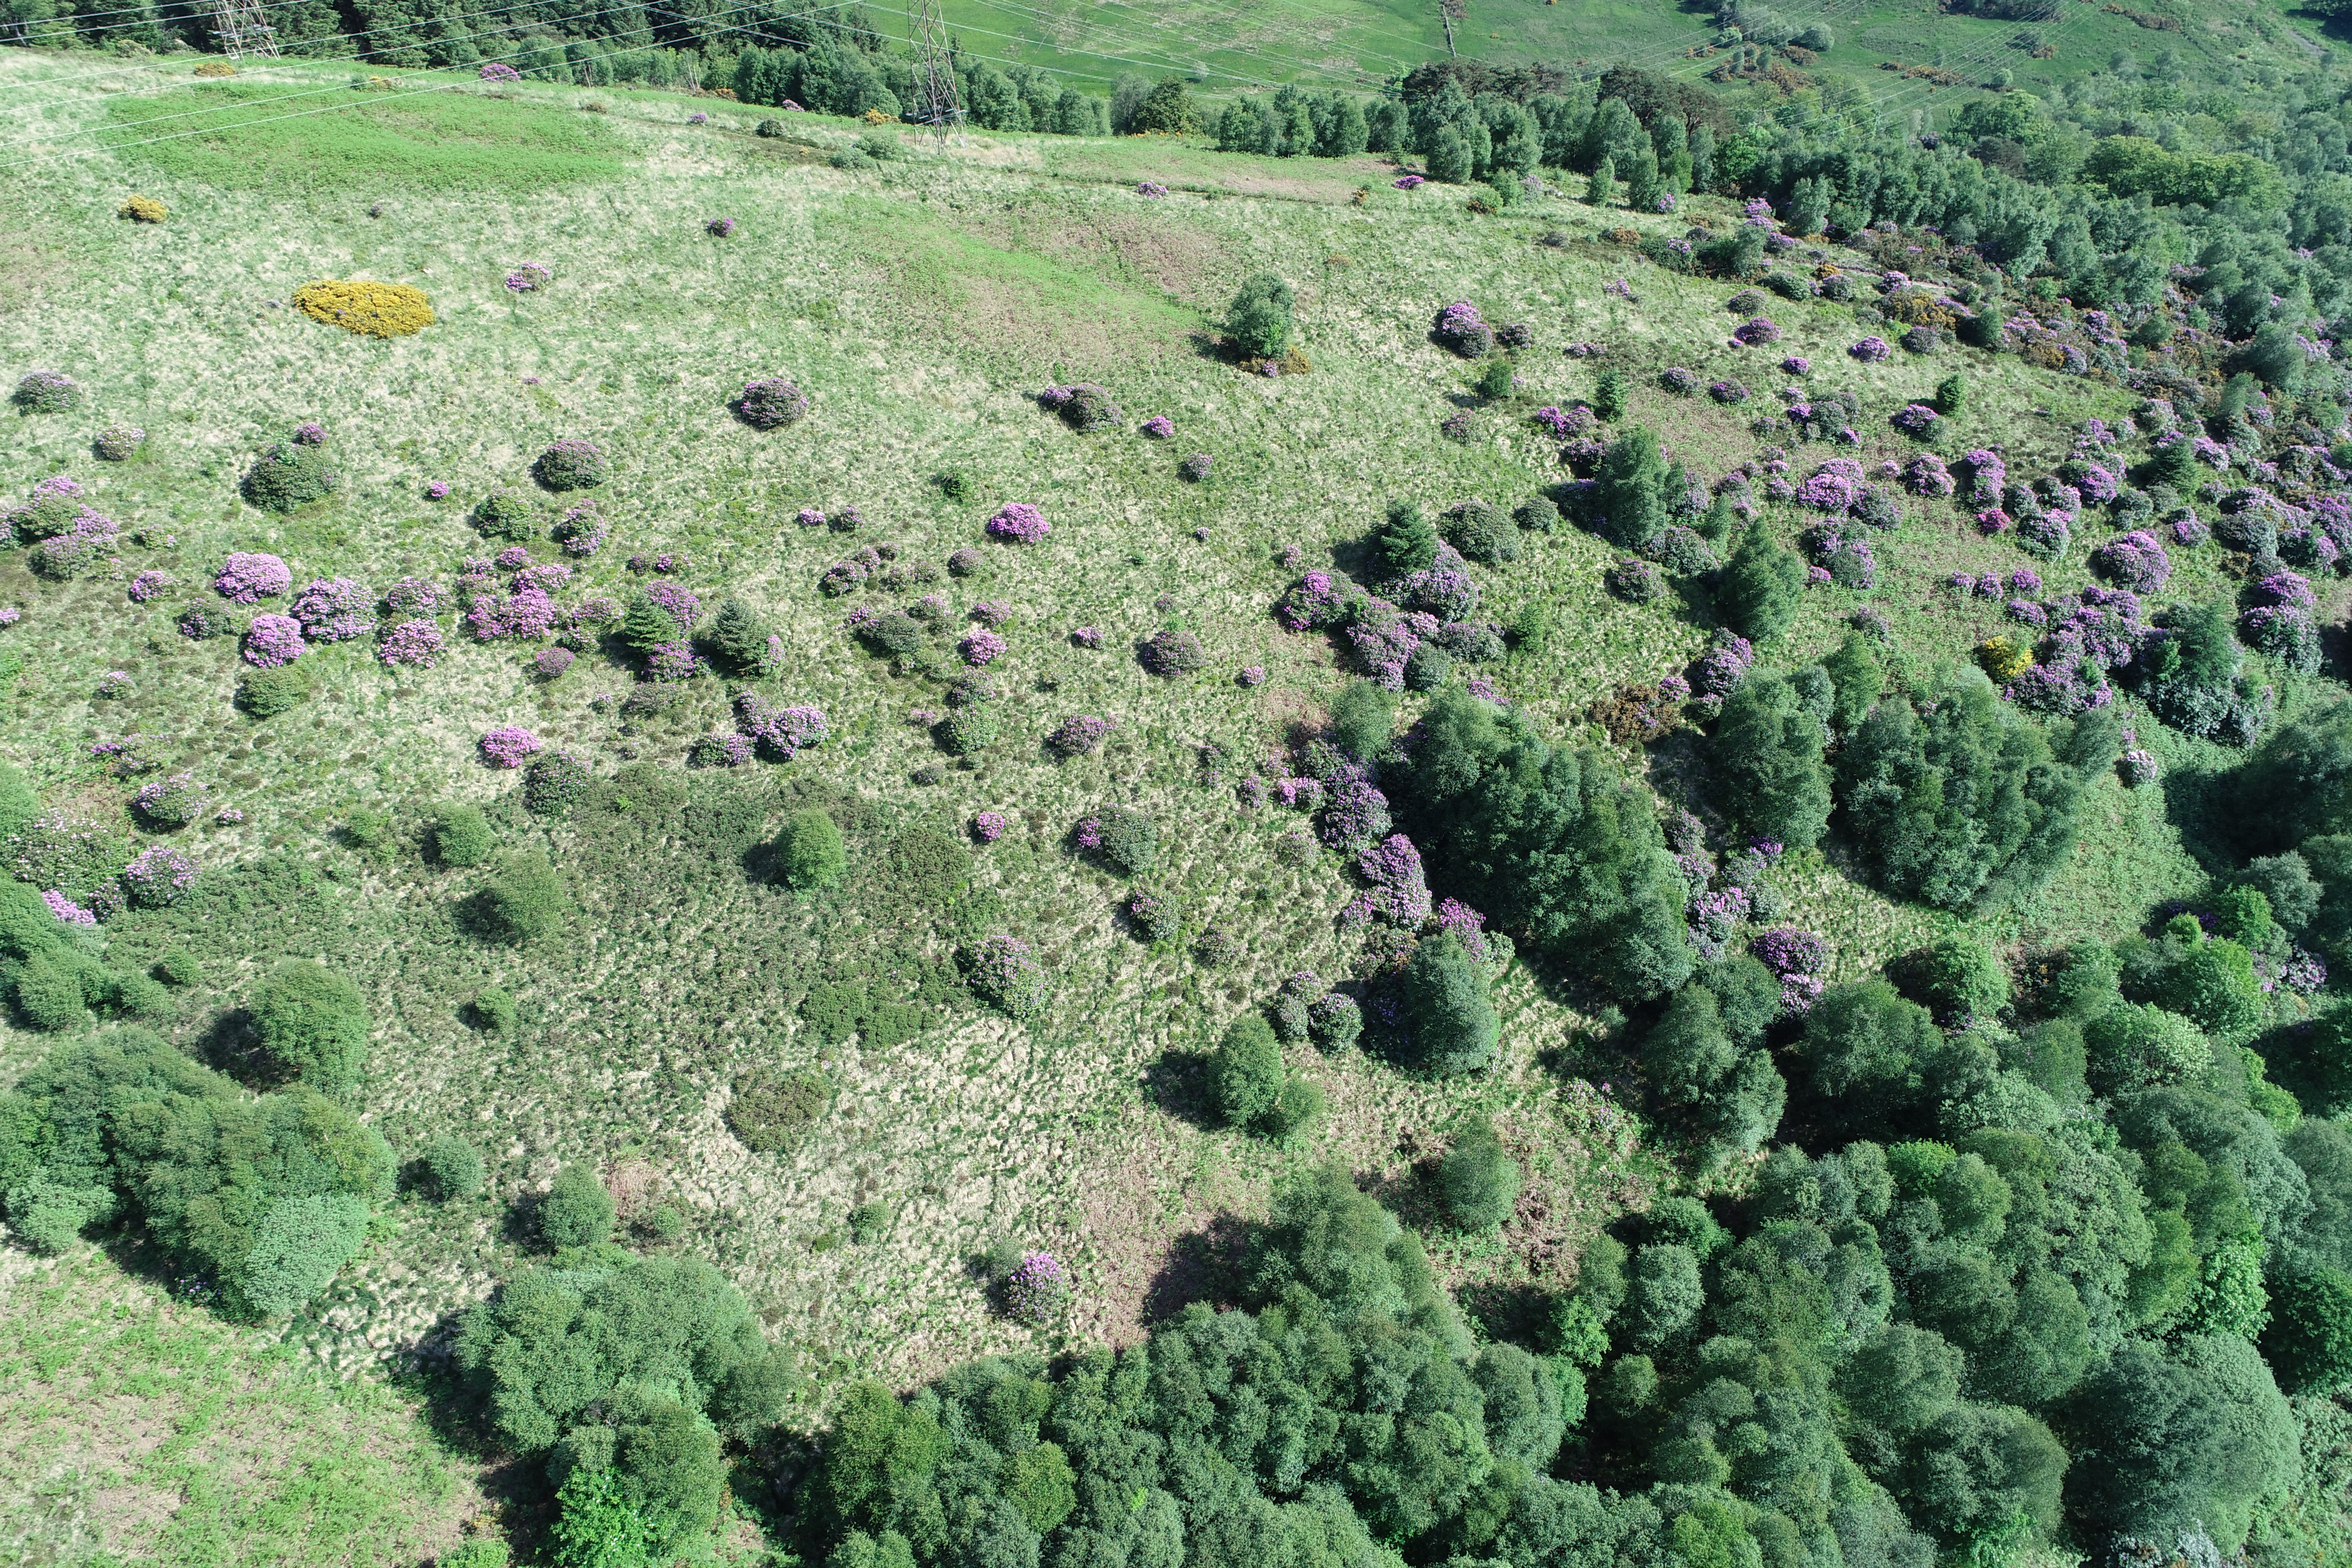 Drone shots surveying a bunch of rhodie plants